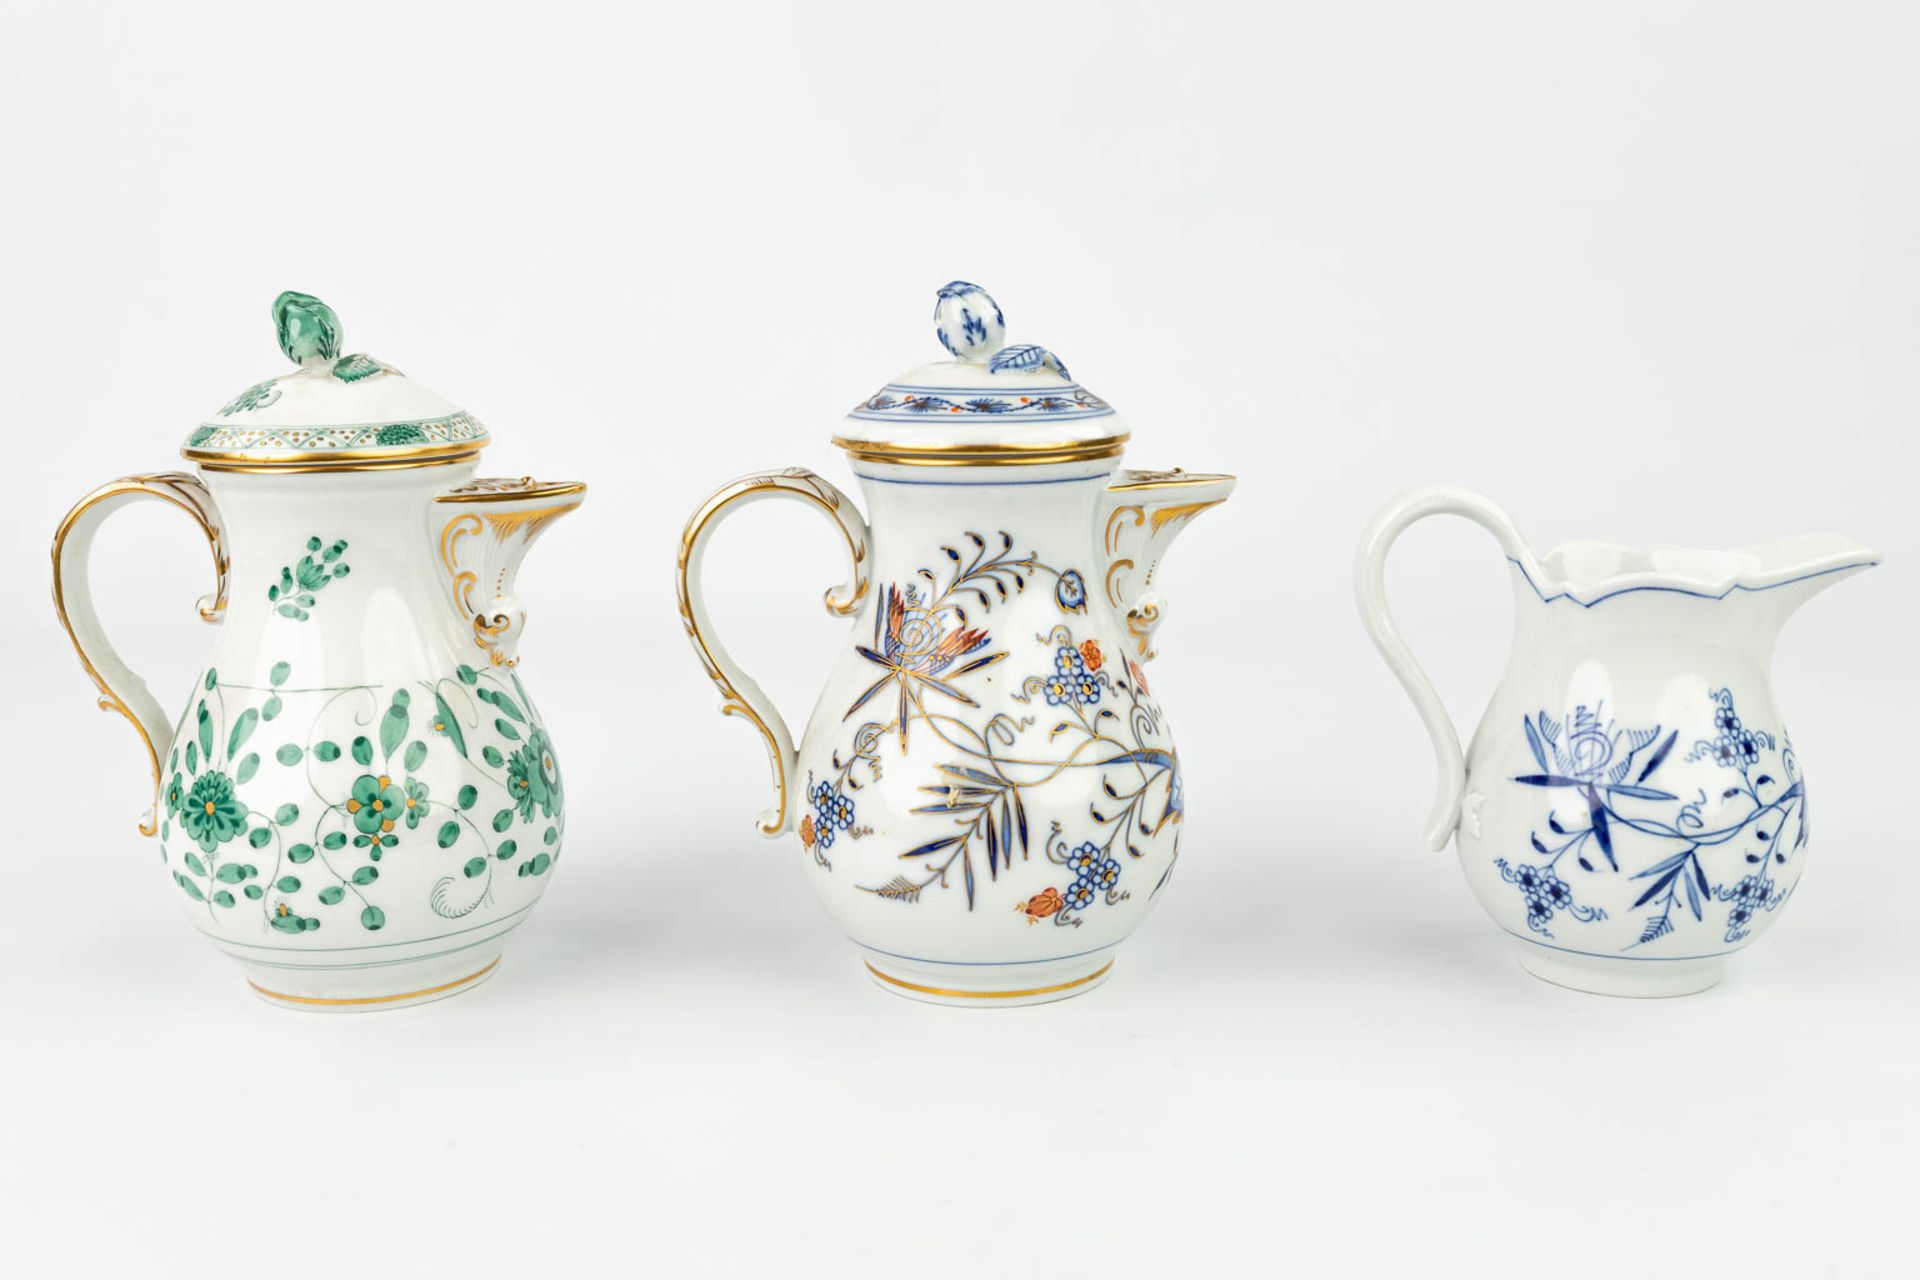 A collection of 2 coffee pots and a milk jug made by Meissen porcelain, 20th century. (H:17cm) - Image 12 of 17